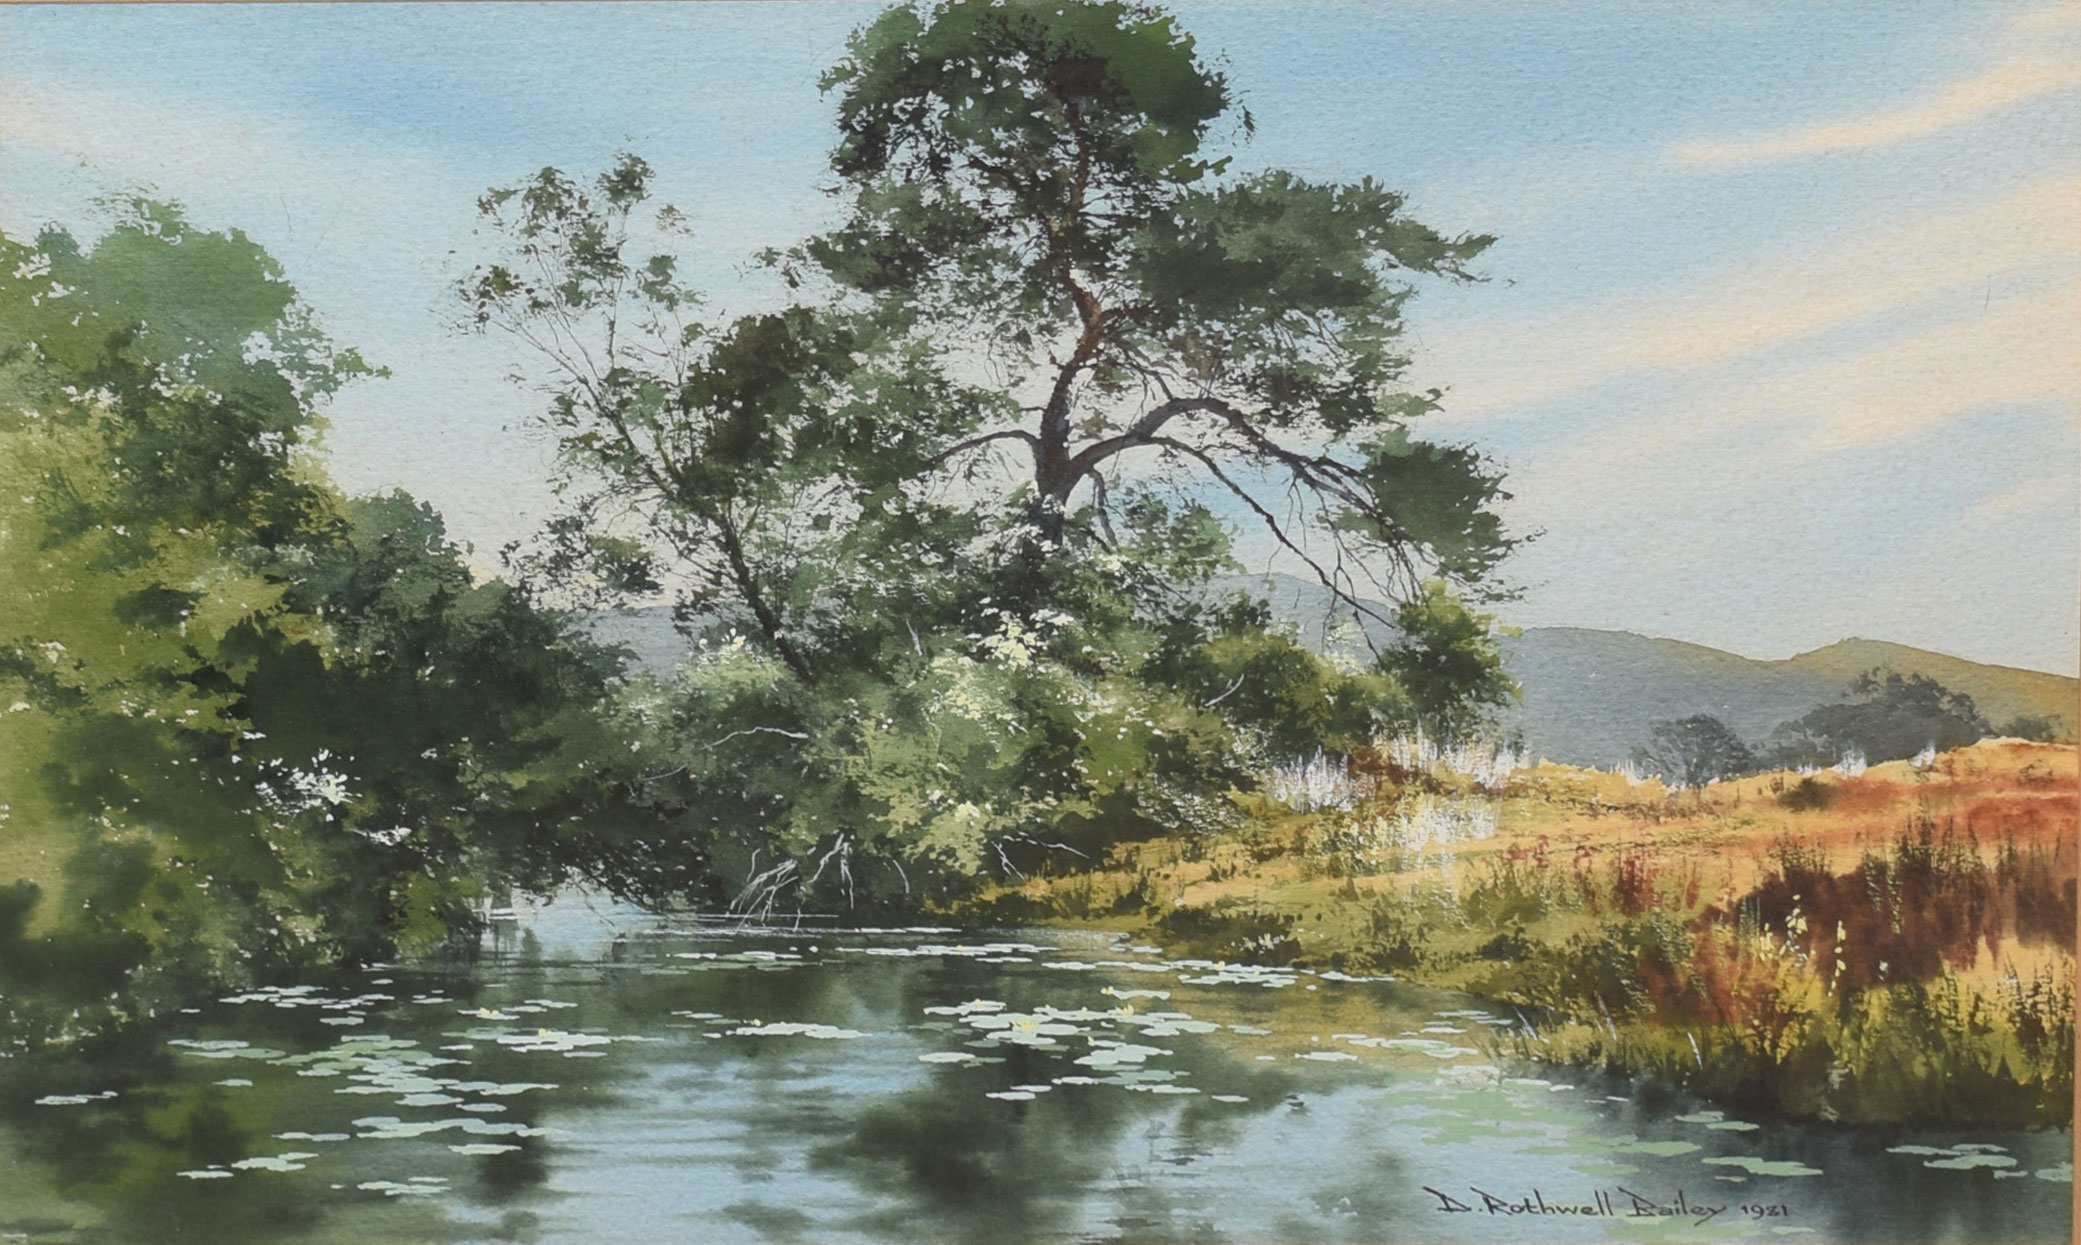 D Rothwell Bailey, "Near Newby Bridge, Cumbria", watercolour, signed and dated 1981, 26 x 36cm